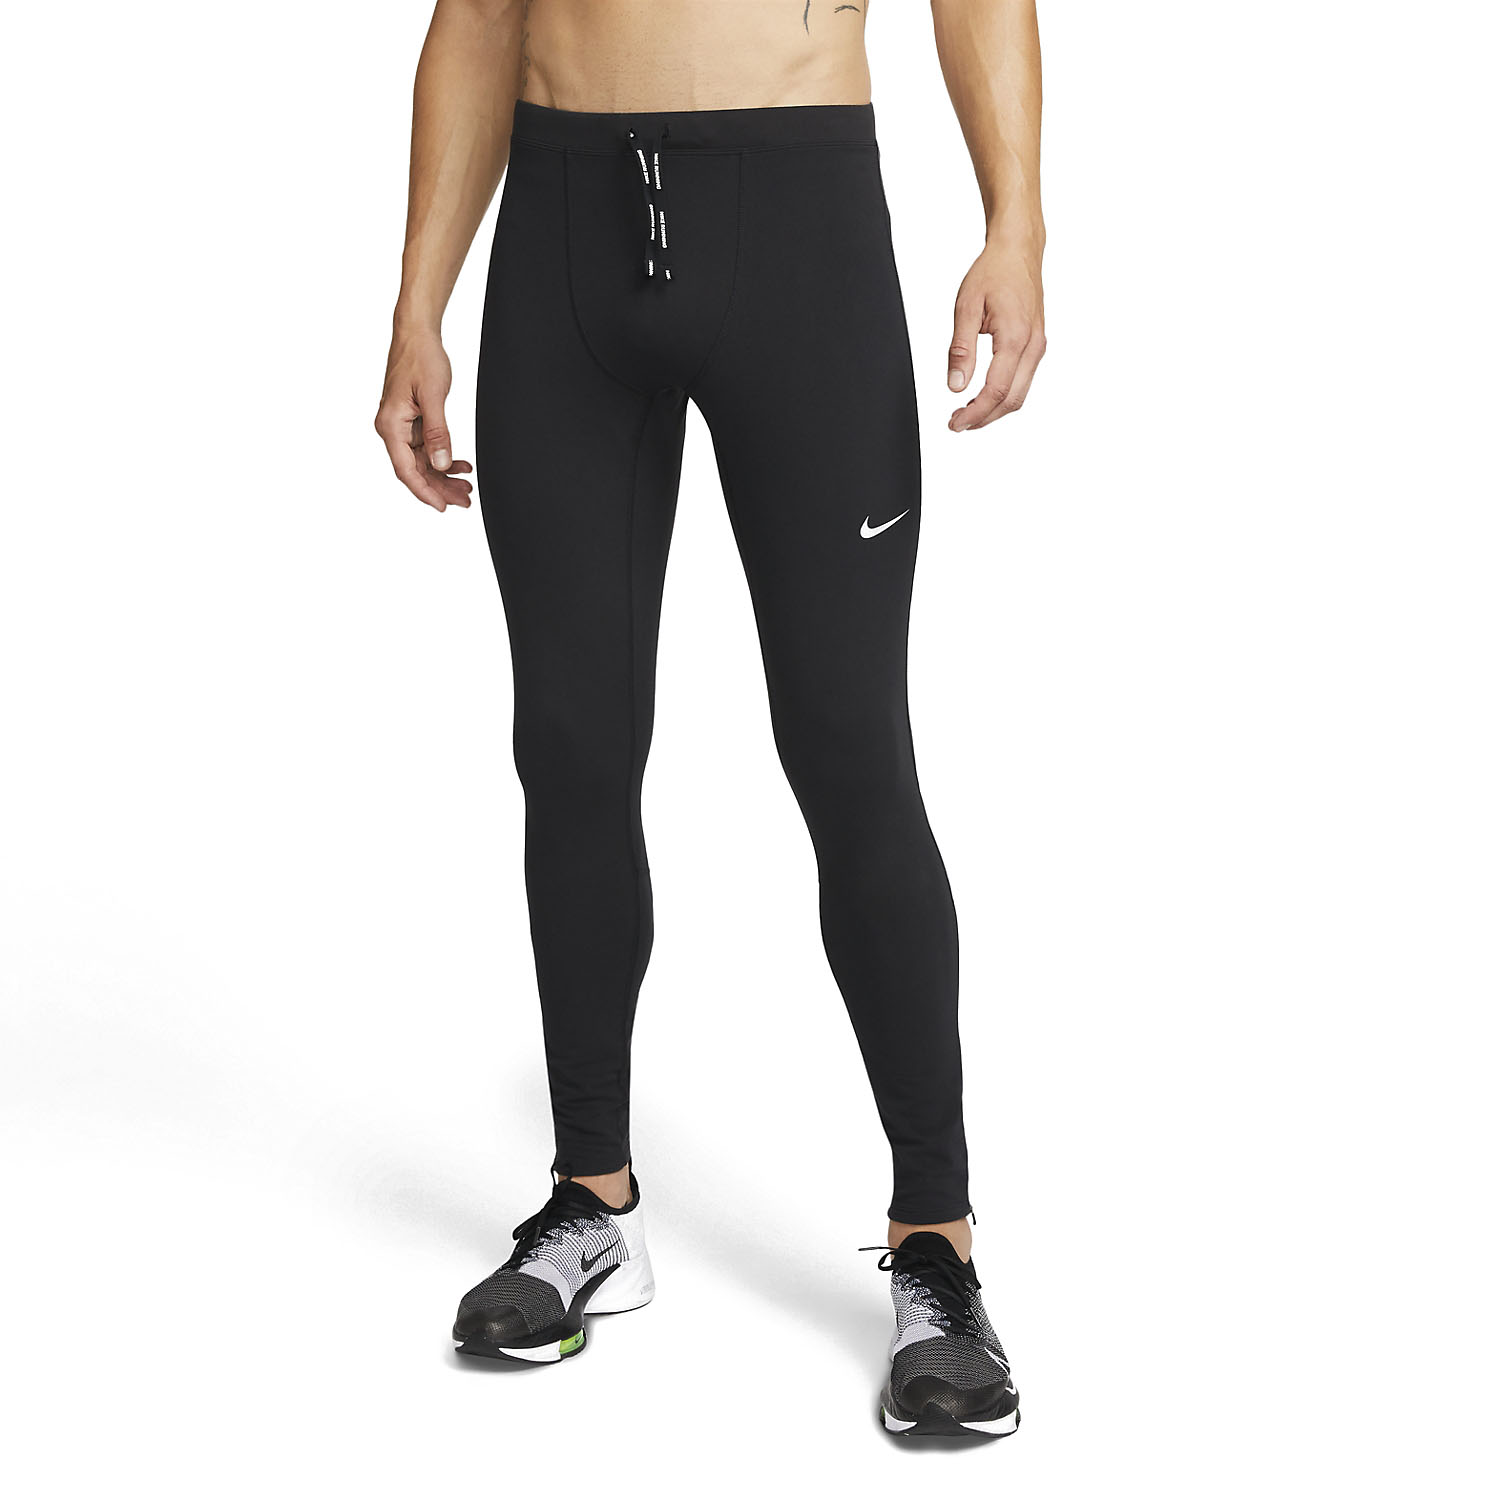 Nike Repel Challenger Long Tights - Black/Reflective Silver